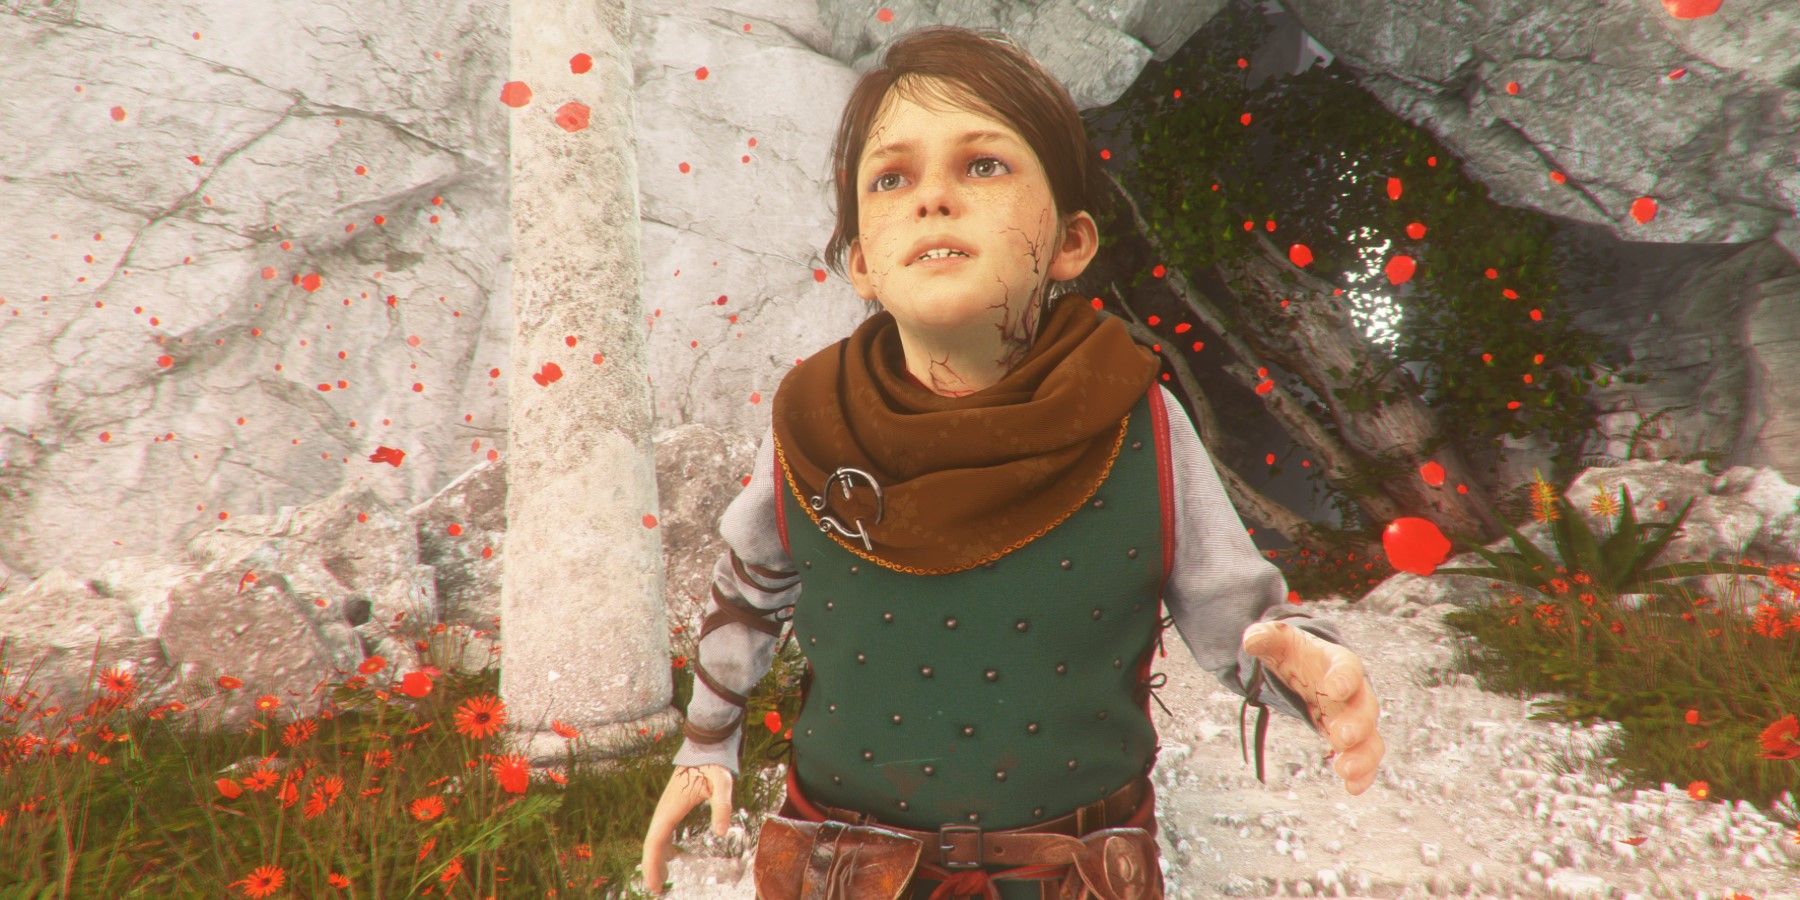 A Plague Tale: Innocence is going to be a TV series